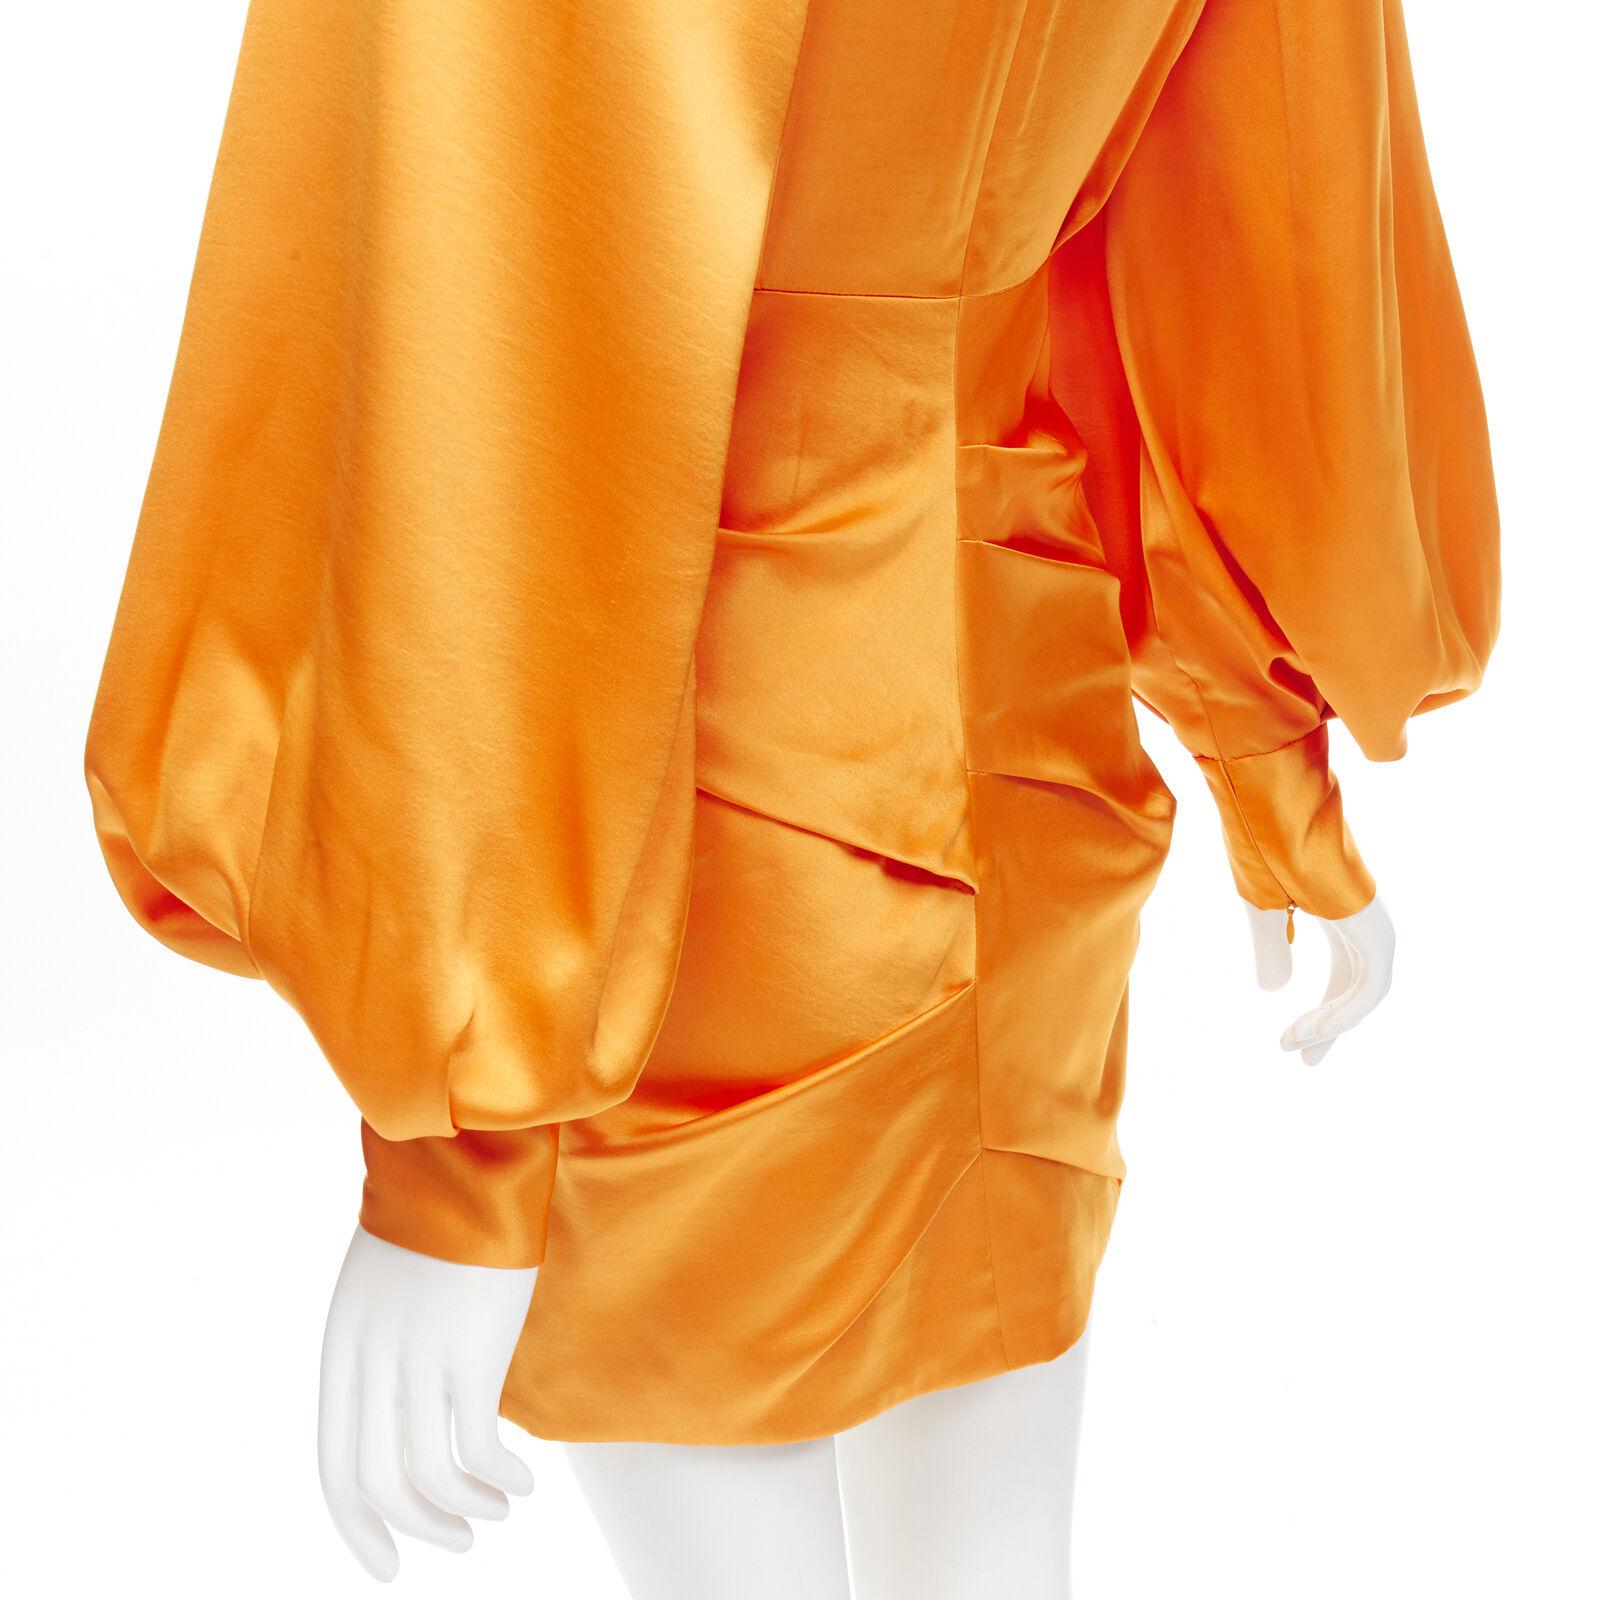 ACLER bright orange silky keyhole draped raglan puff sleeves mini dress US2 XS
Reference: AAWC/A00418
Brand: Acler
Material: Polyester
Color: Orange
Pattern: Solid
Closure: Zip
Lining: Fabric
Extra Details: Back zip and ruched bottom details.
Made